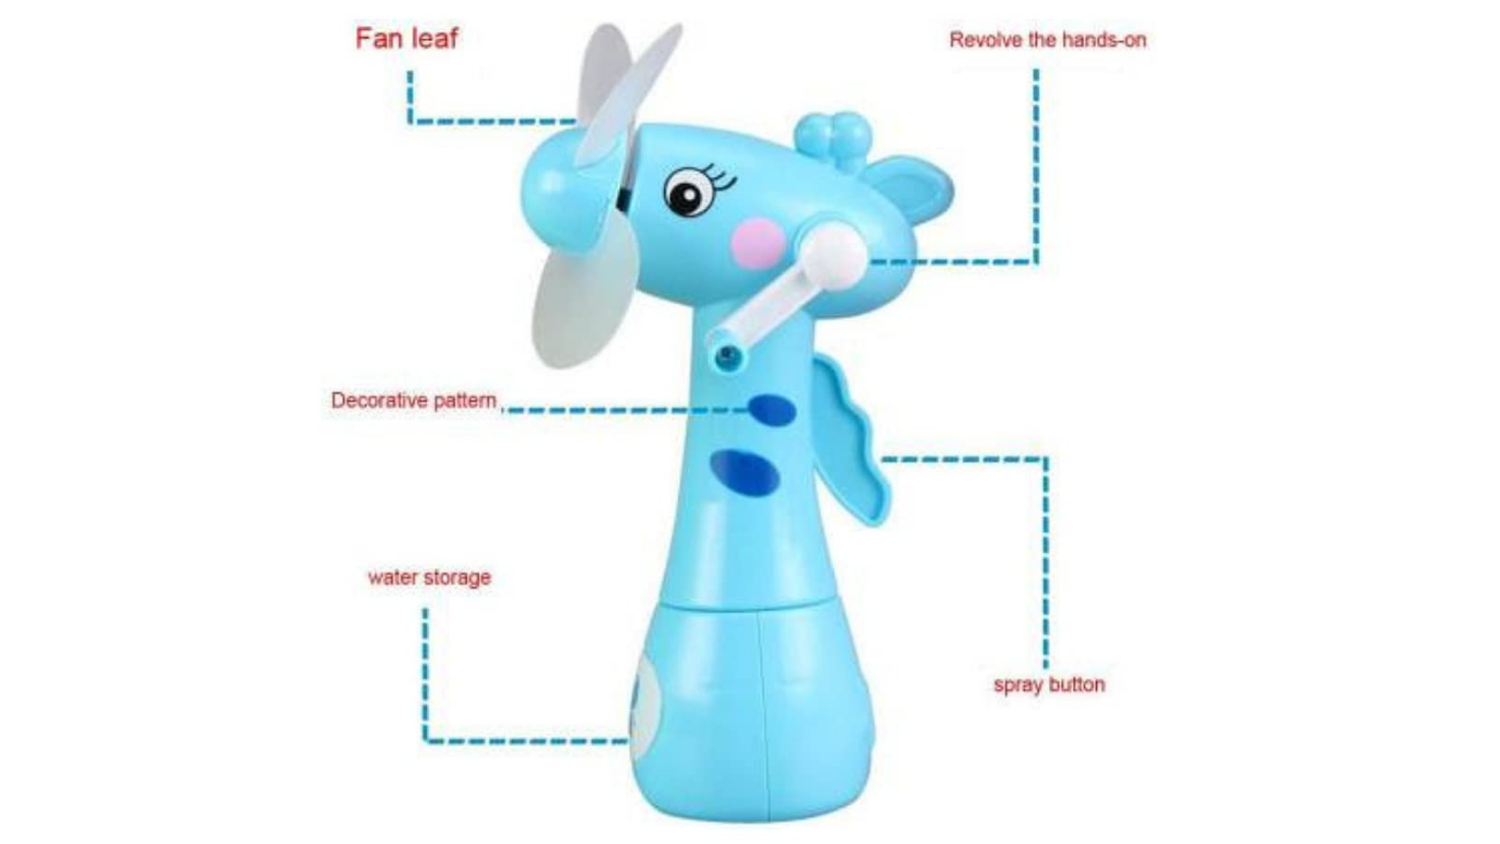 Pancikaa Hand-Driven Portable Mini Fan with Mist Water Spray Toy for Kids (Multicolor, Pack of 2)